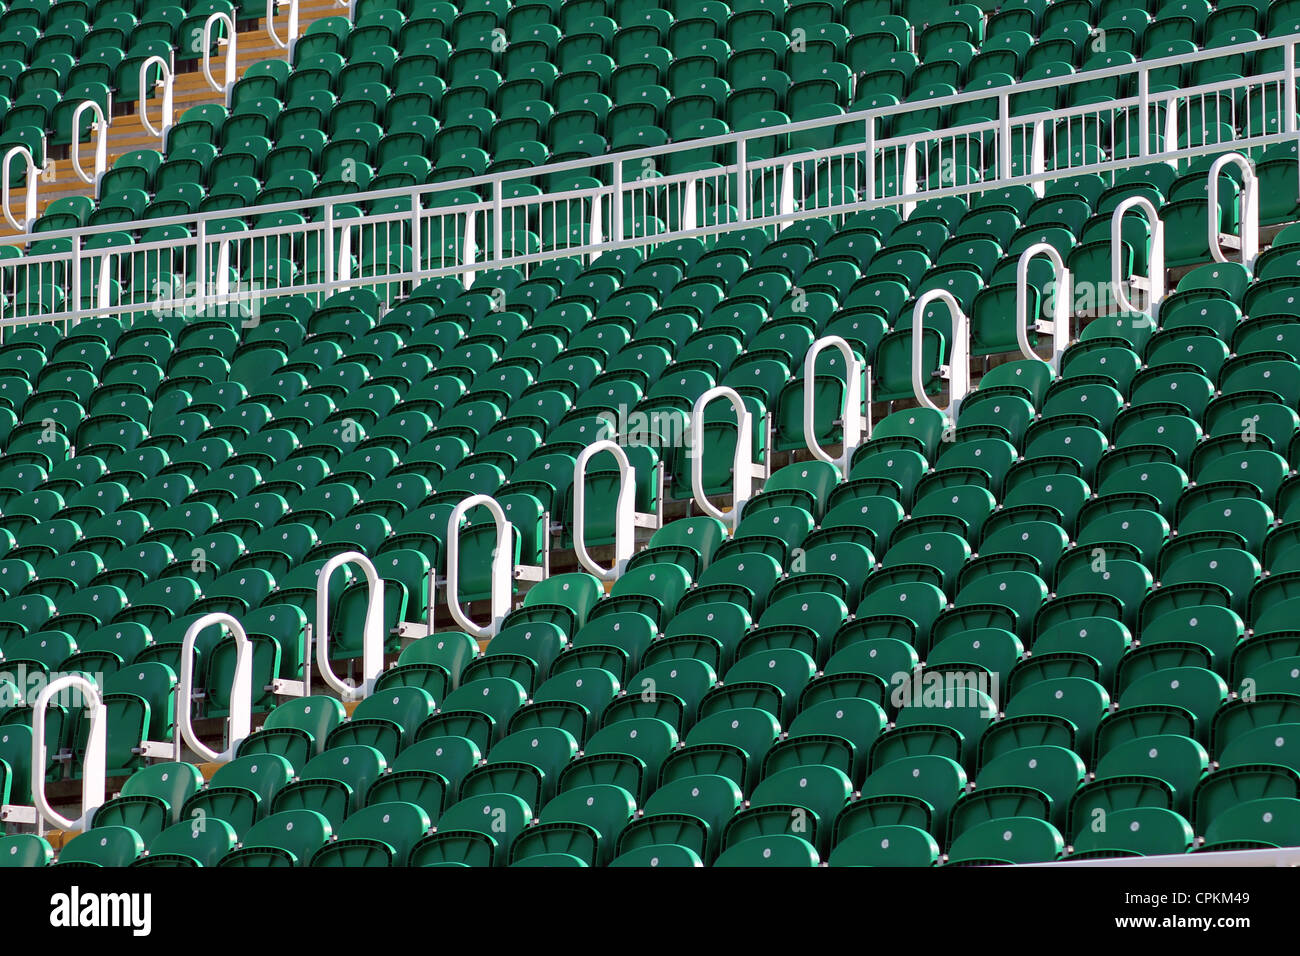 Rows of green seating in stadium outdoors, low angle Stock Photo